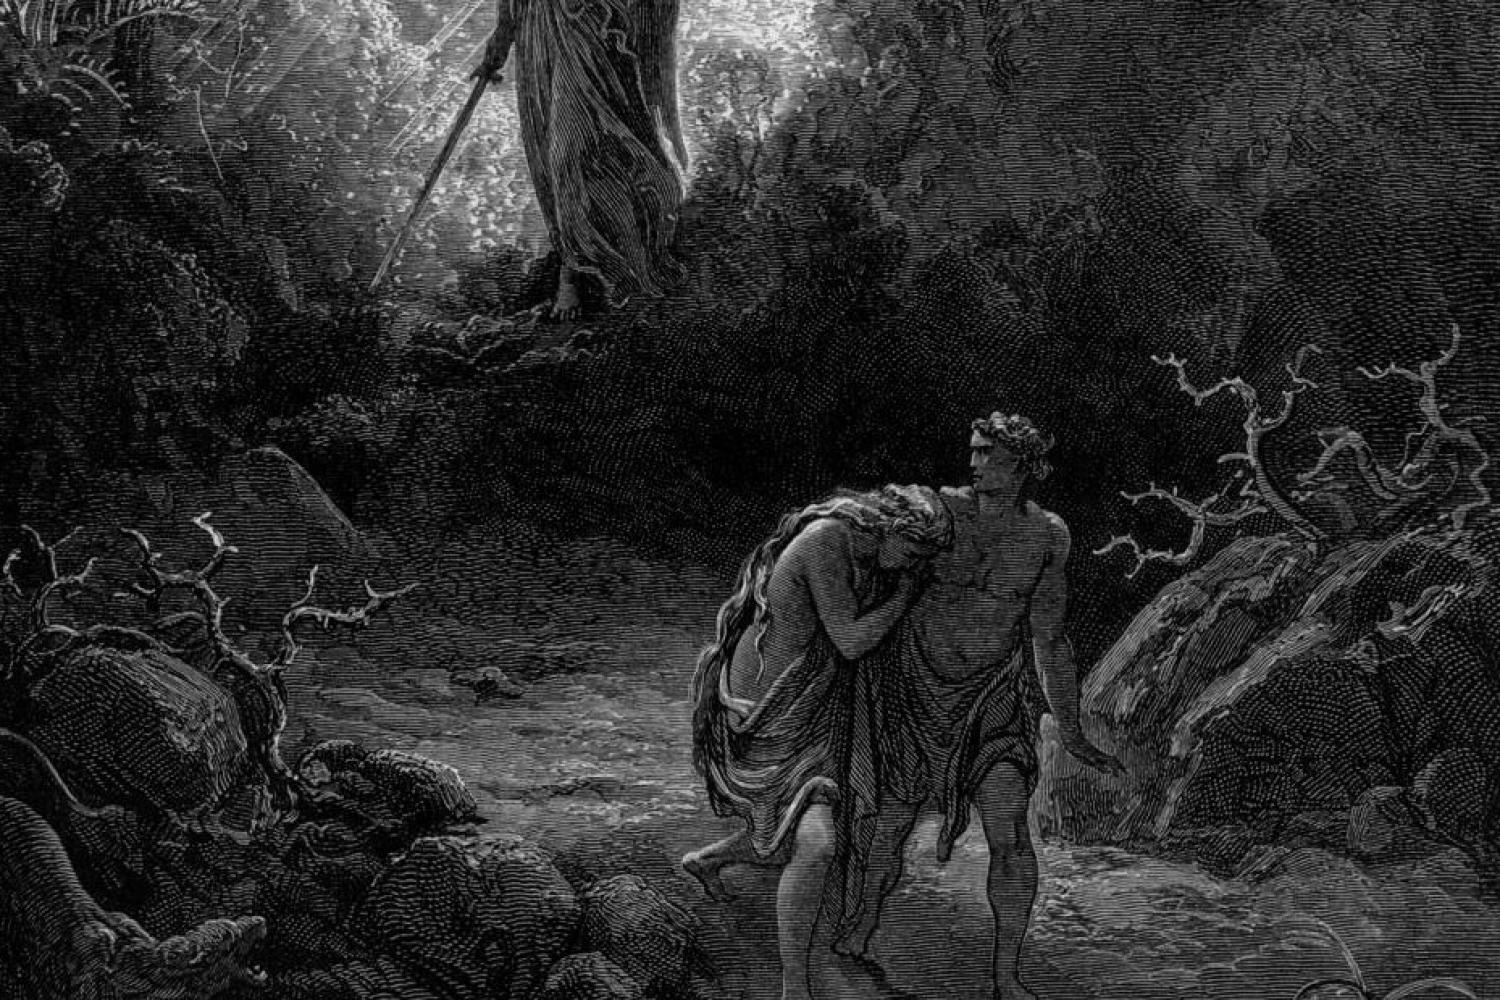 "Adam and Eve Driven out of Eden," by Gustave Dore